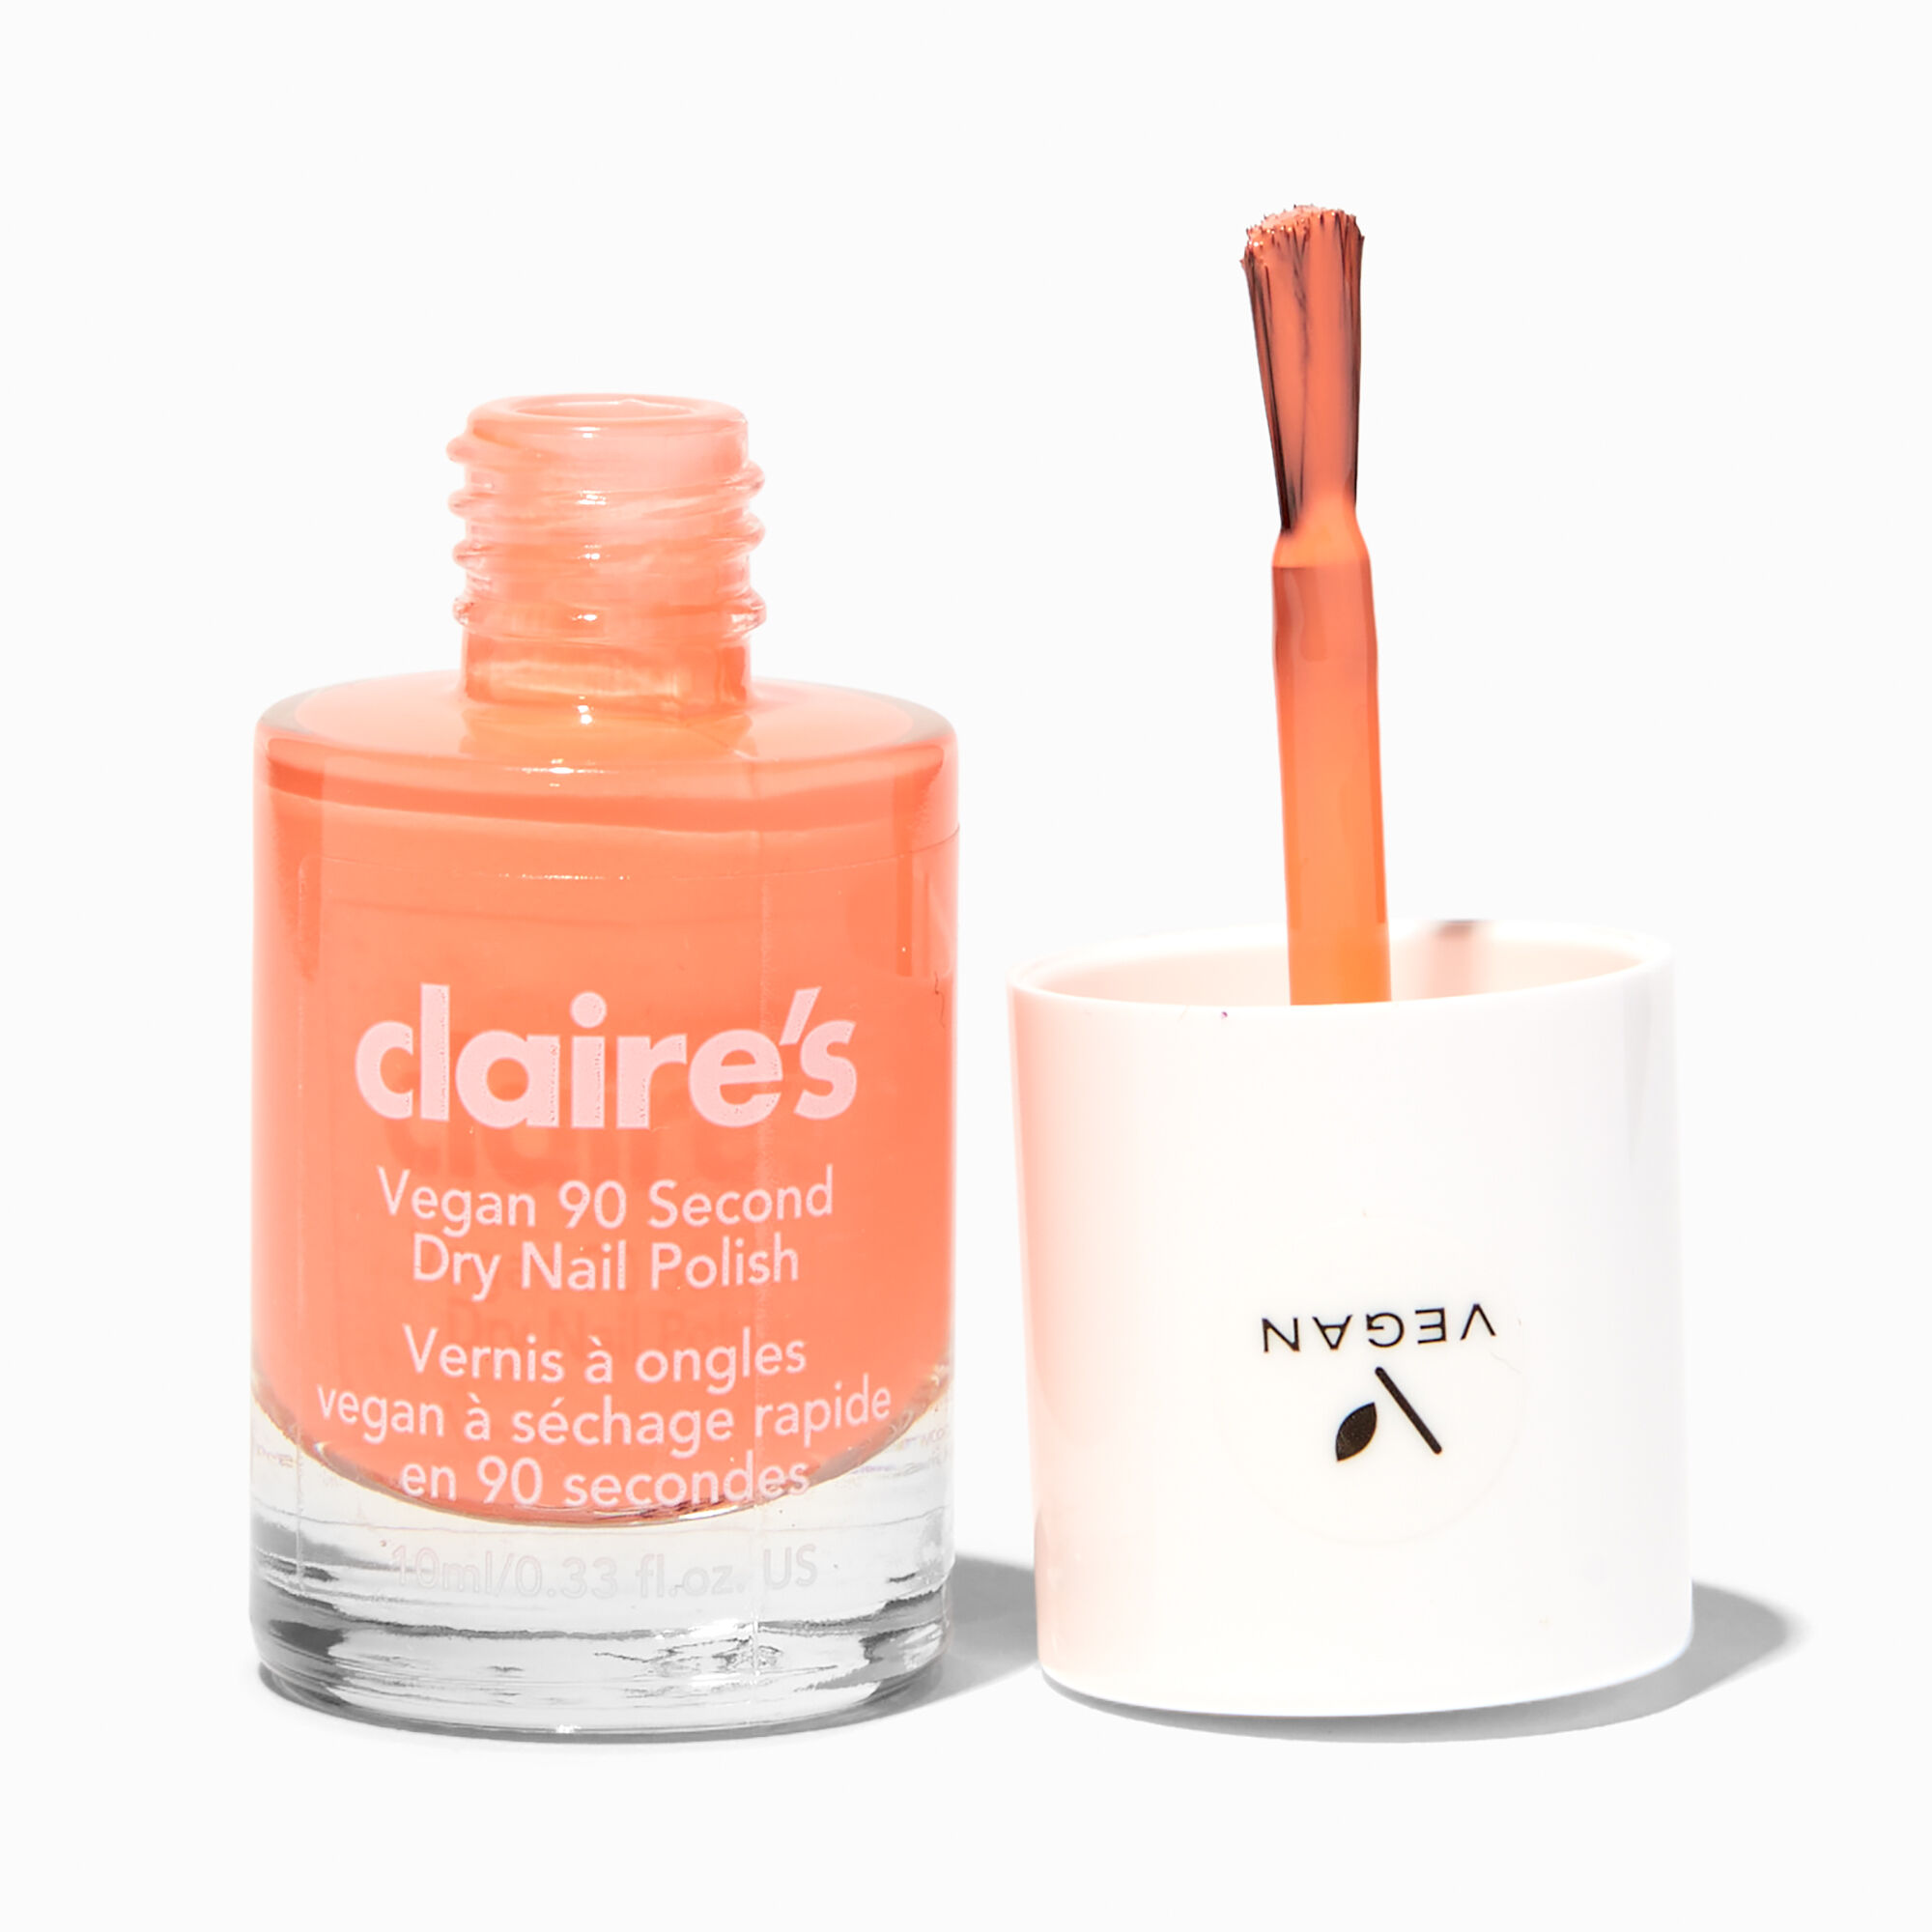 View Claires Vegan 90 Second Dry Nail Polish Squeeze Orange information